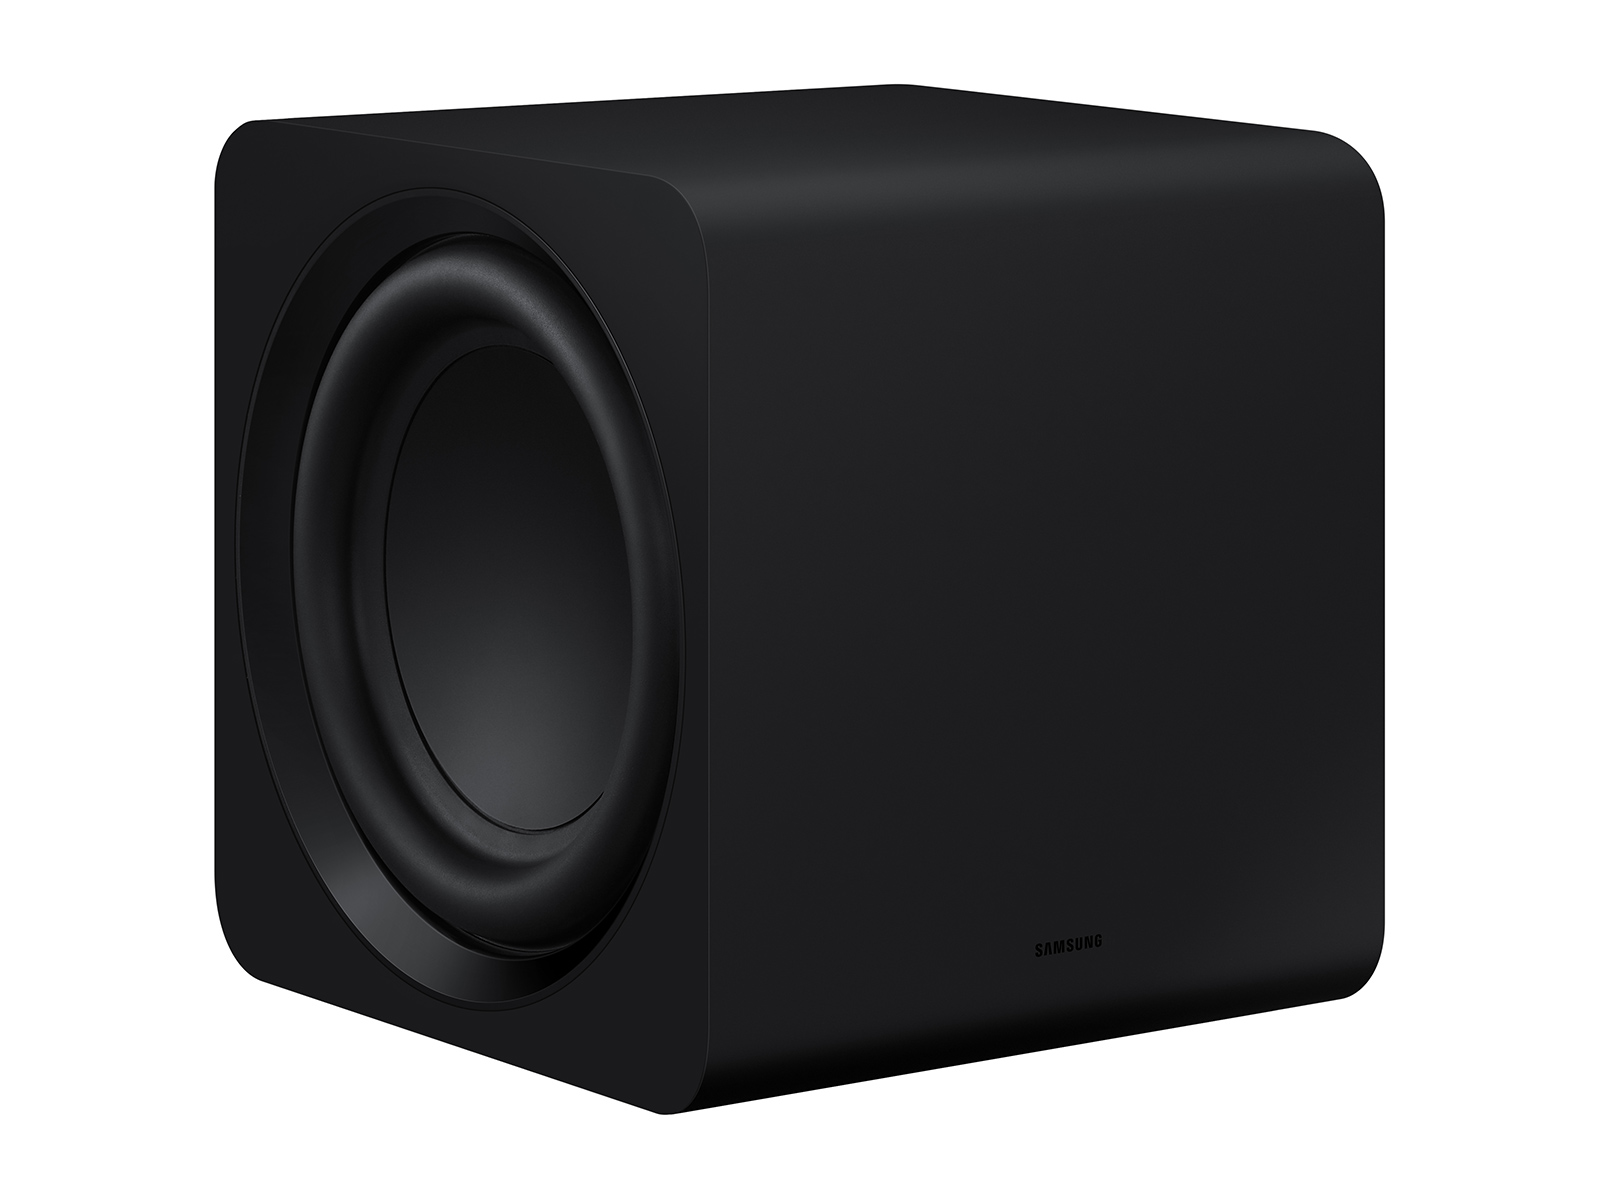 SamsungUS/home/television-home-theater/home-theater/wireless-speakers/09202022/SWA-W510_003_L-Perspective_Black-Gallery-1600x1200.jpg